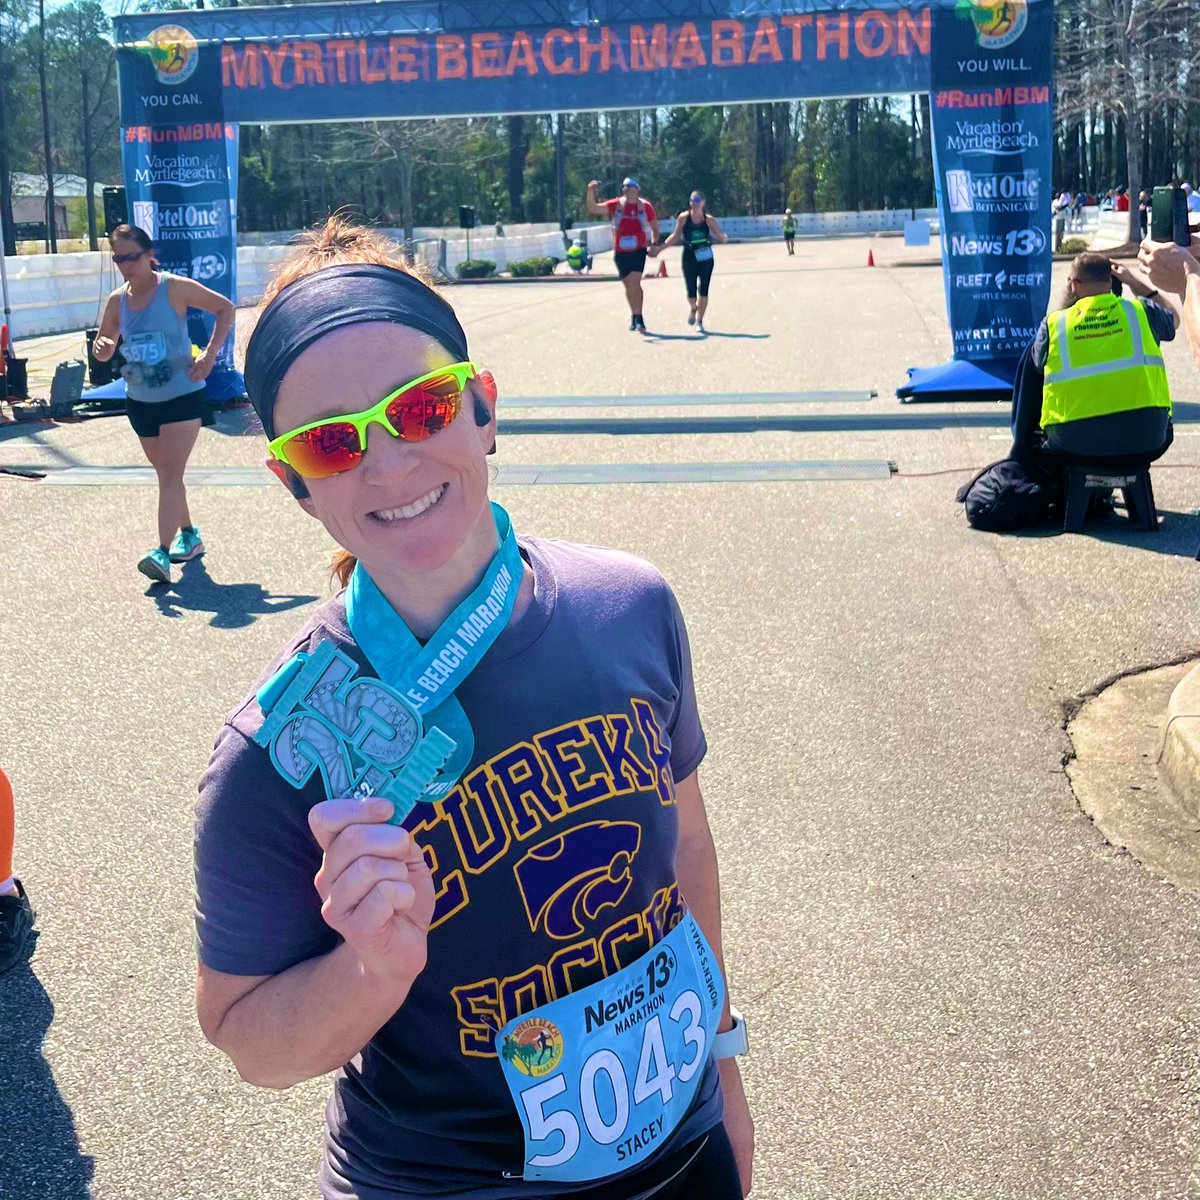 This past weekend I was able to check off another state off my list. ✅ South Carolina ✅ Marathon # 14 #50in50by50 #runstl #runmo